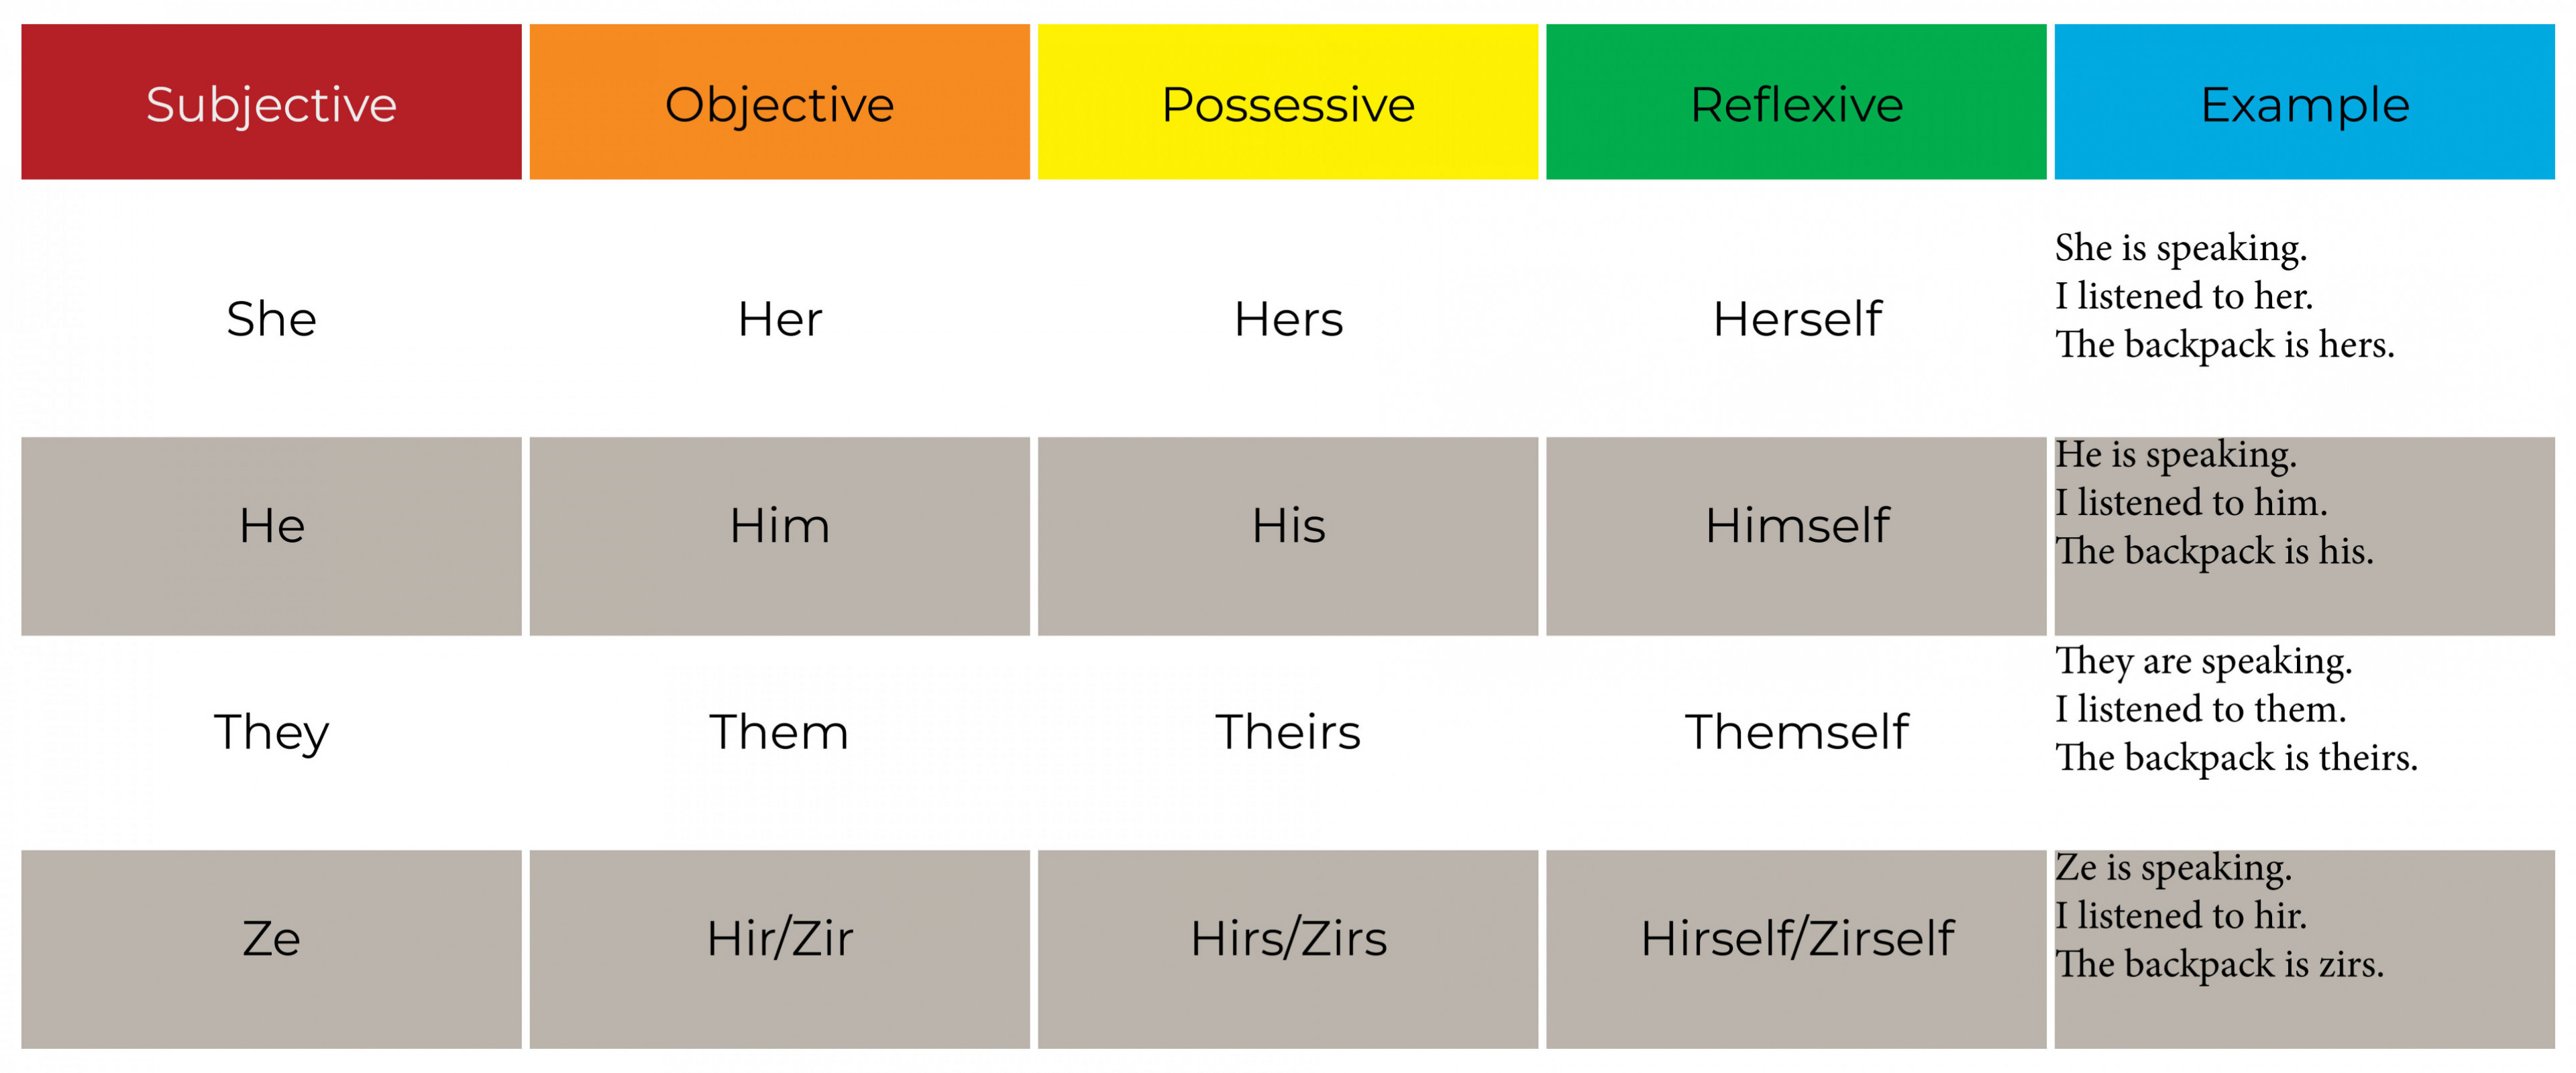 Pronouns organized into subjective, objective, possessive and reflexive with examples.